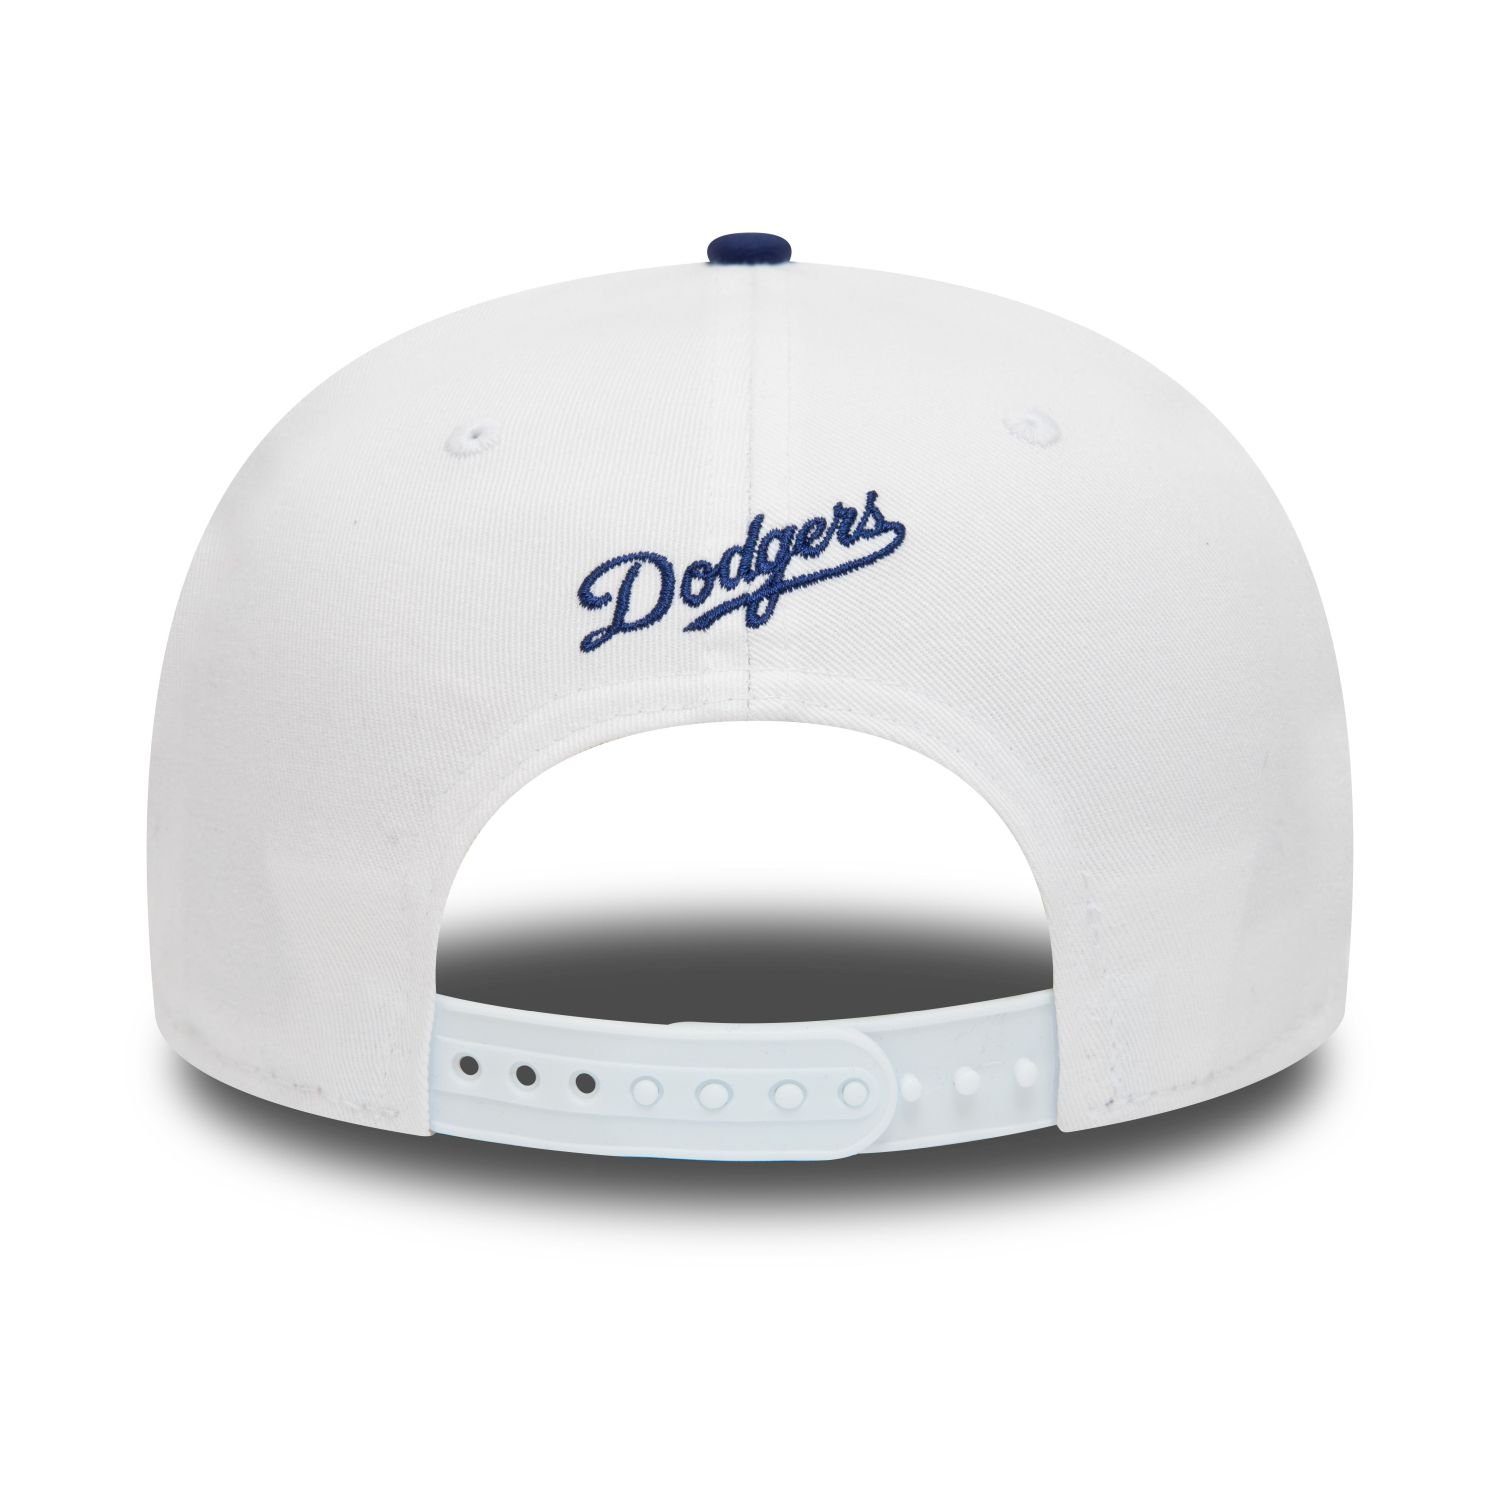 Los Cap SIDE PATCH Angeles Era 9Fifty Snapback New Dodgers